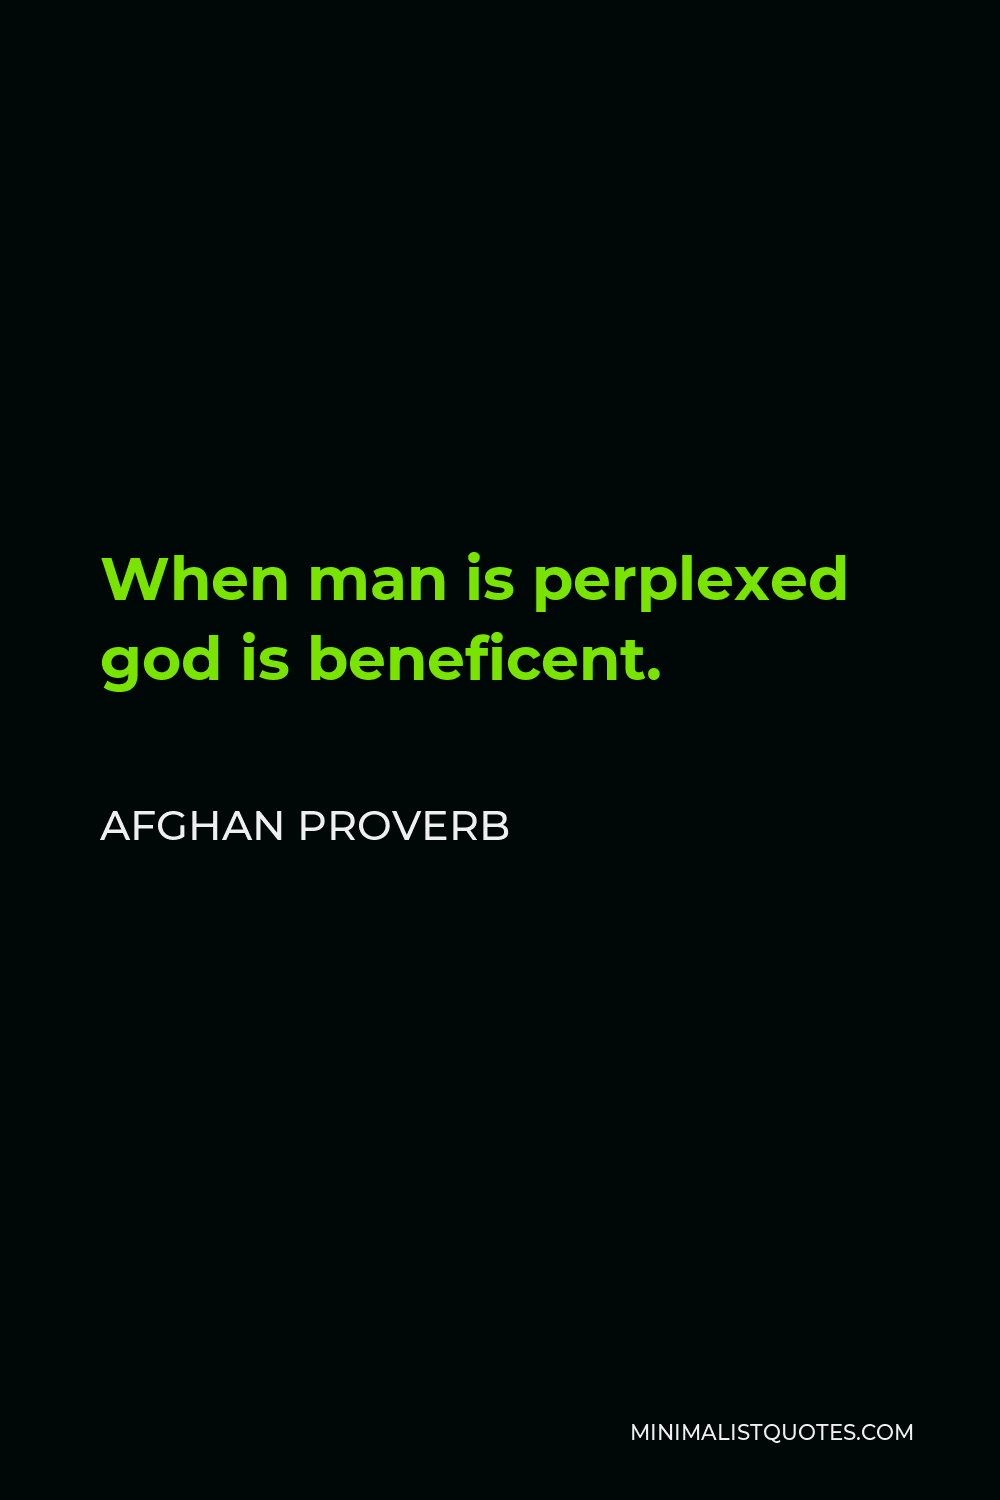 Afghan Proverb Quote - When man is perplexed god is beneficent.